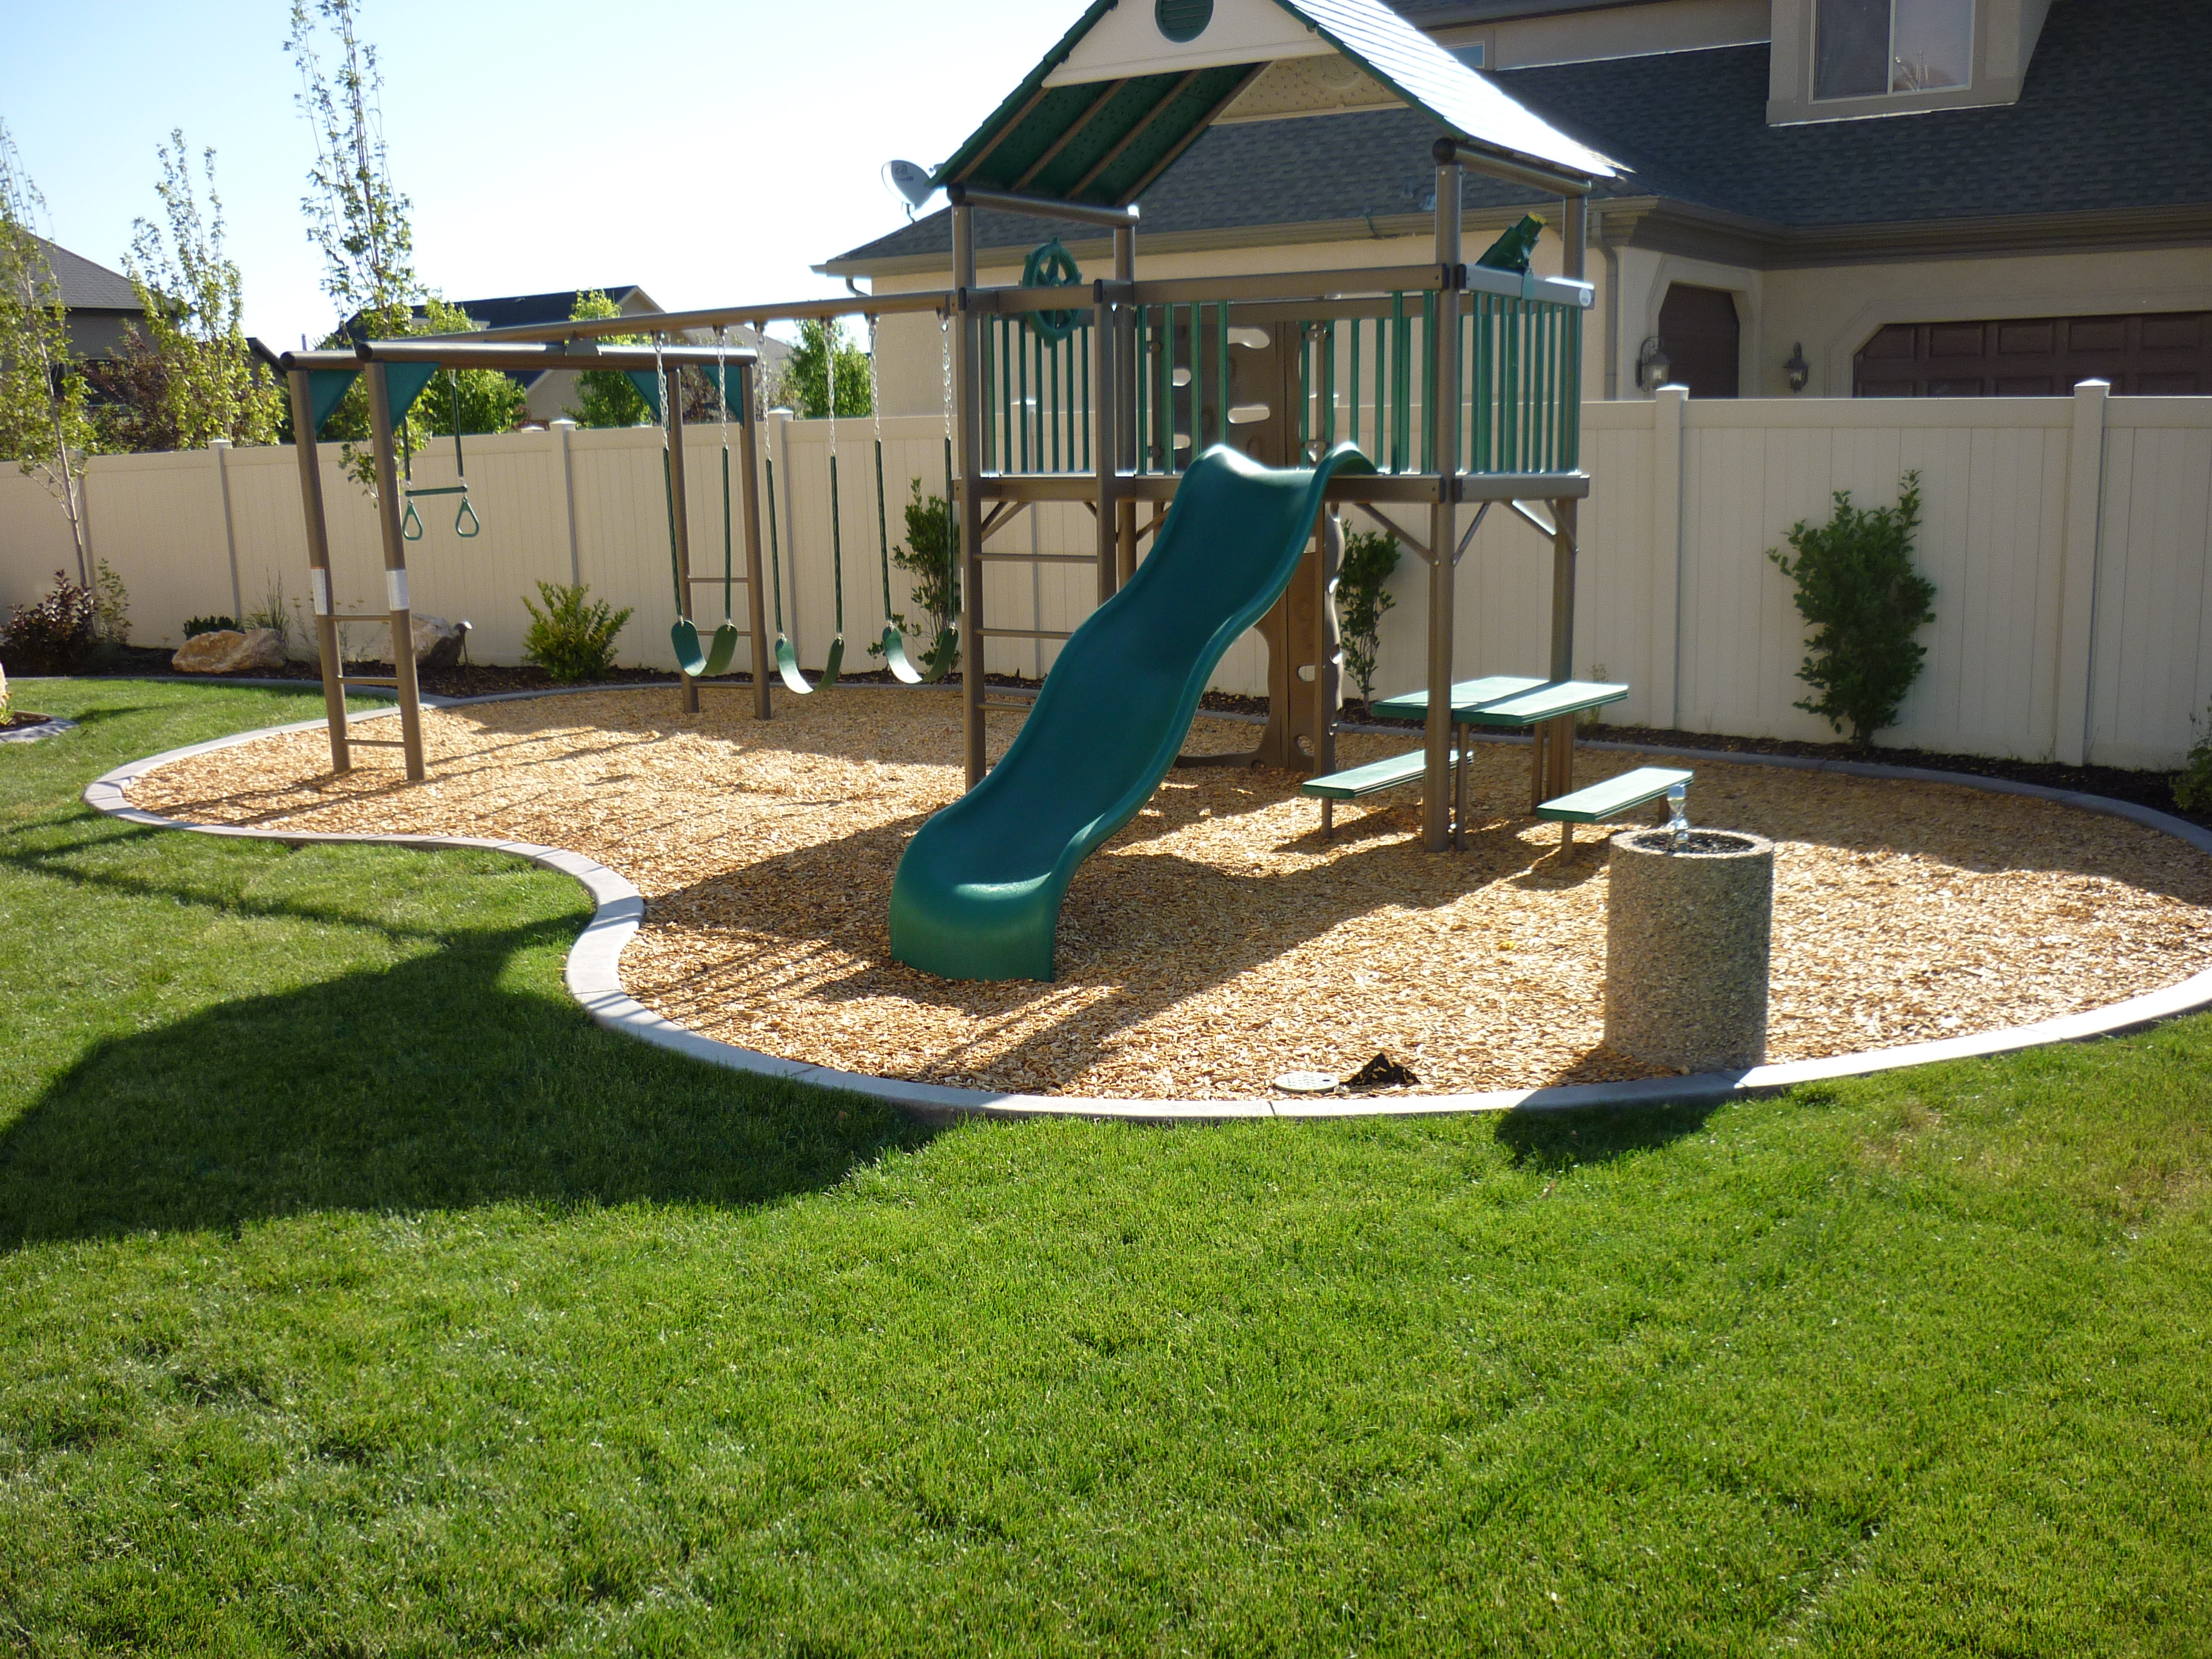 Utah Sports Courts, Play grounds, backyards, trampolines in Salt Lake City, Utah County and 